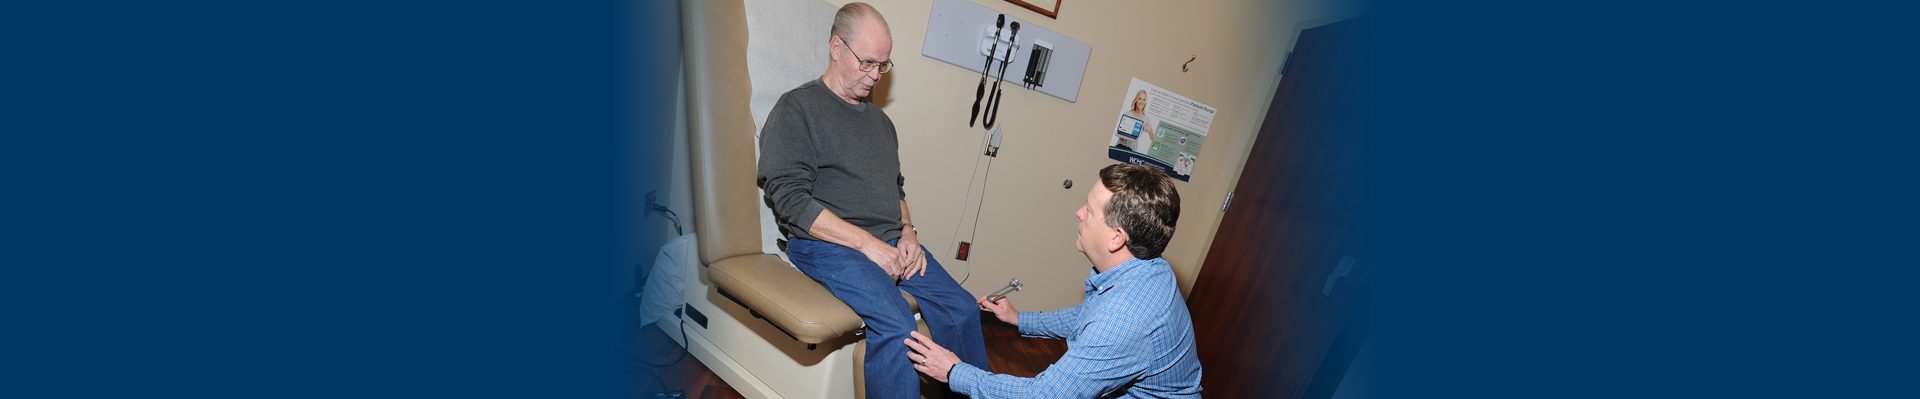 Banner picture of a male Physician sitting on a stool in front of an elderly  male patient. The elderly patient is looking at the Physician.